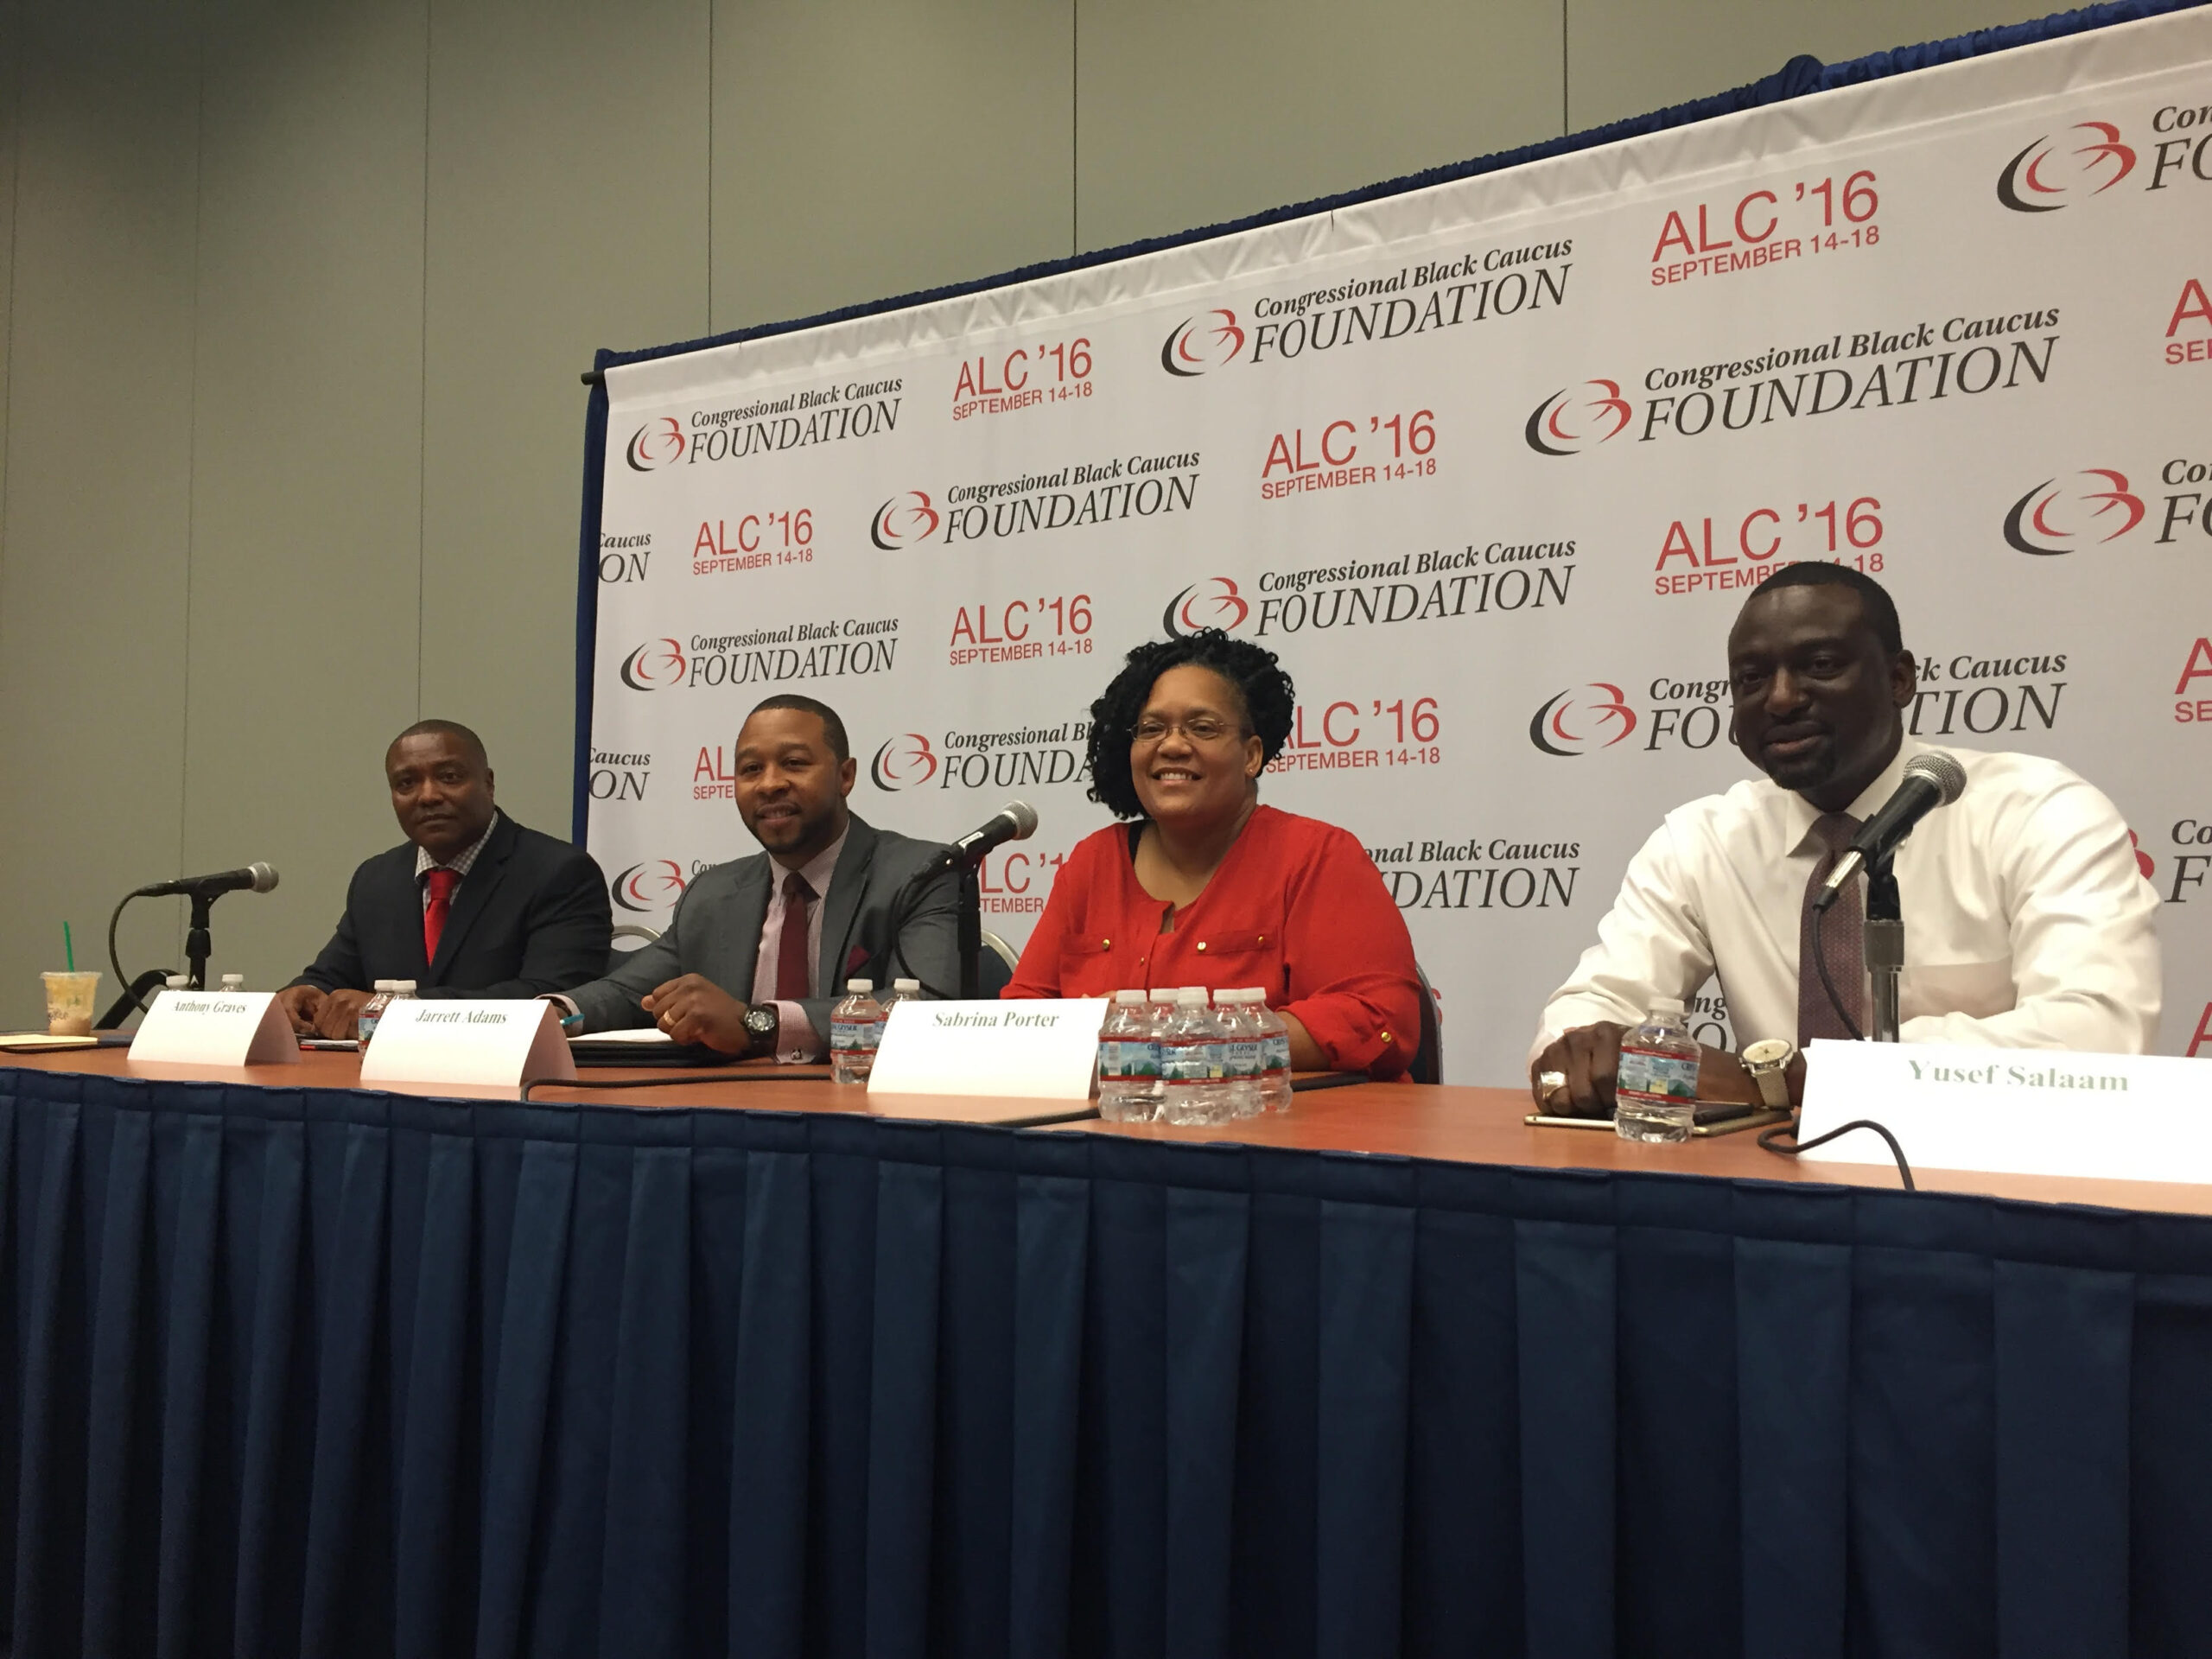 Innocence Project, Wrongfully Convicted Participate in Congressional Black Caucus Policy Panel in Washington, D.C.